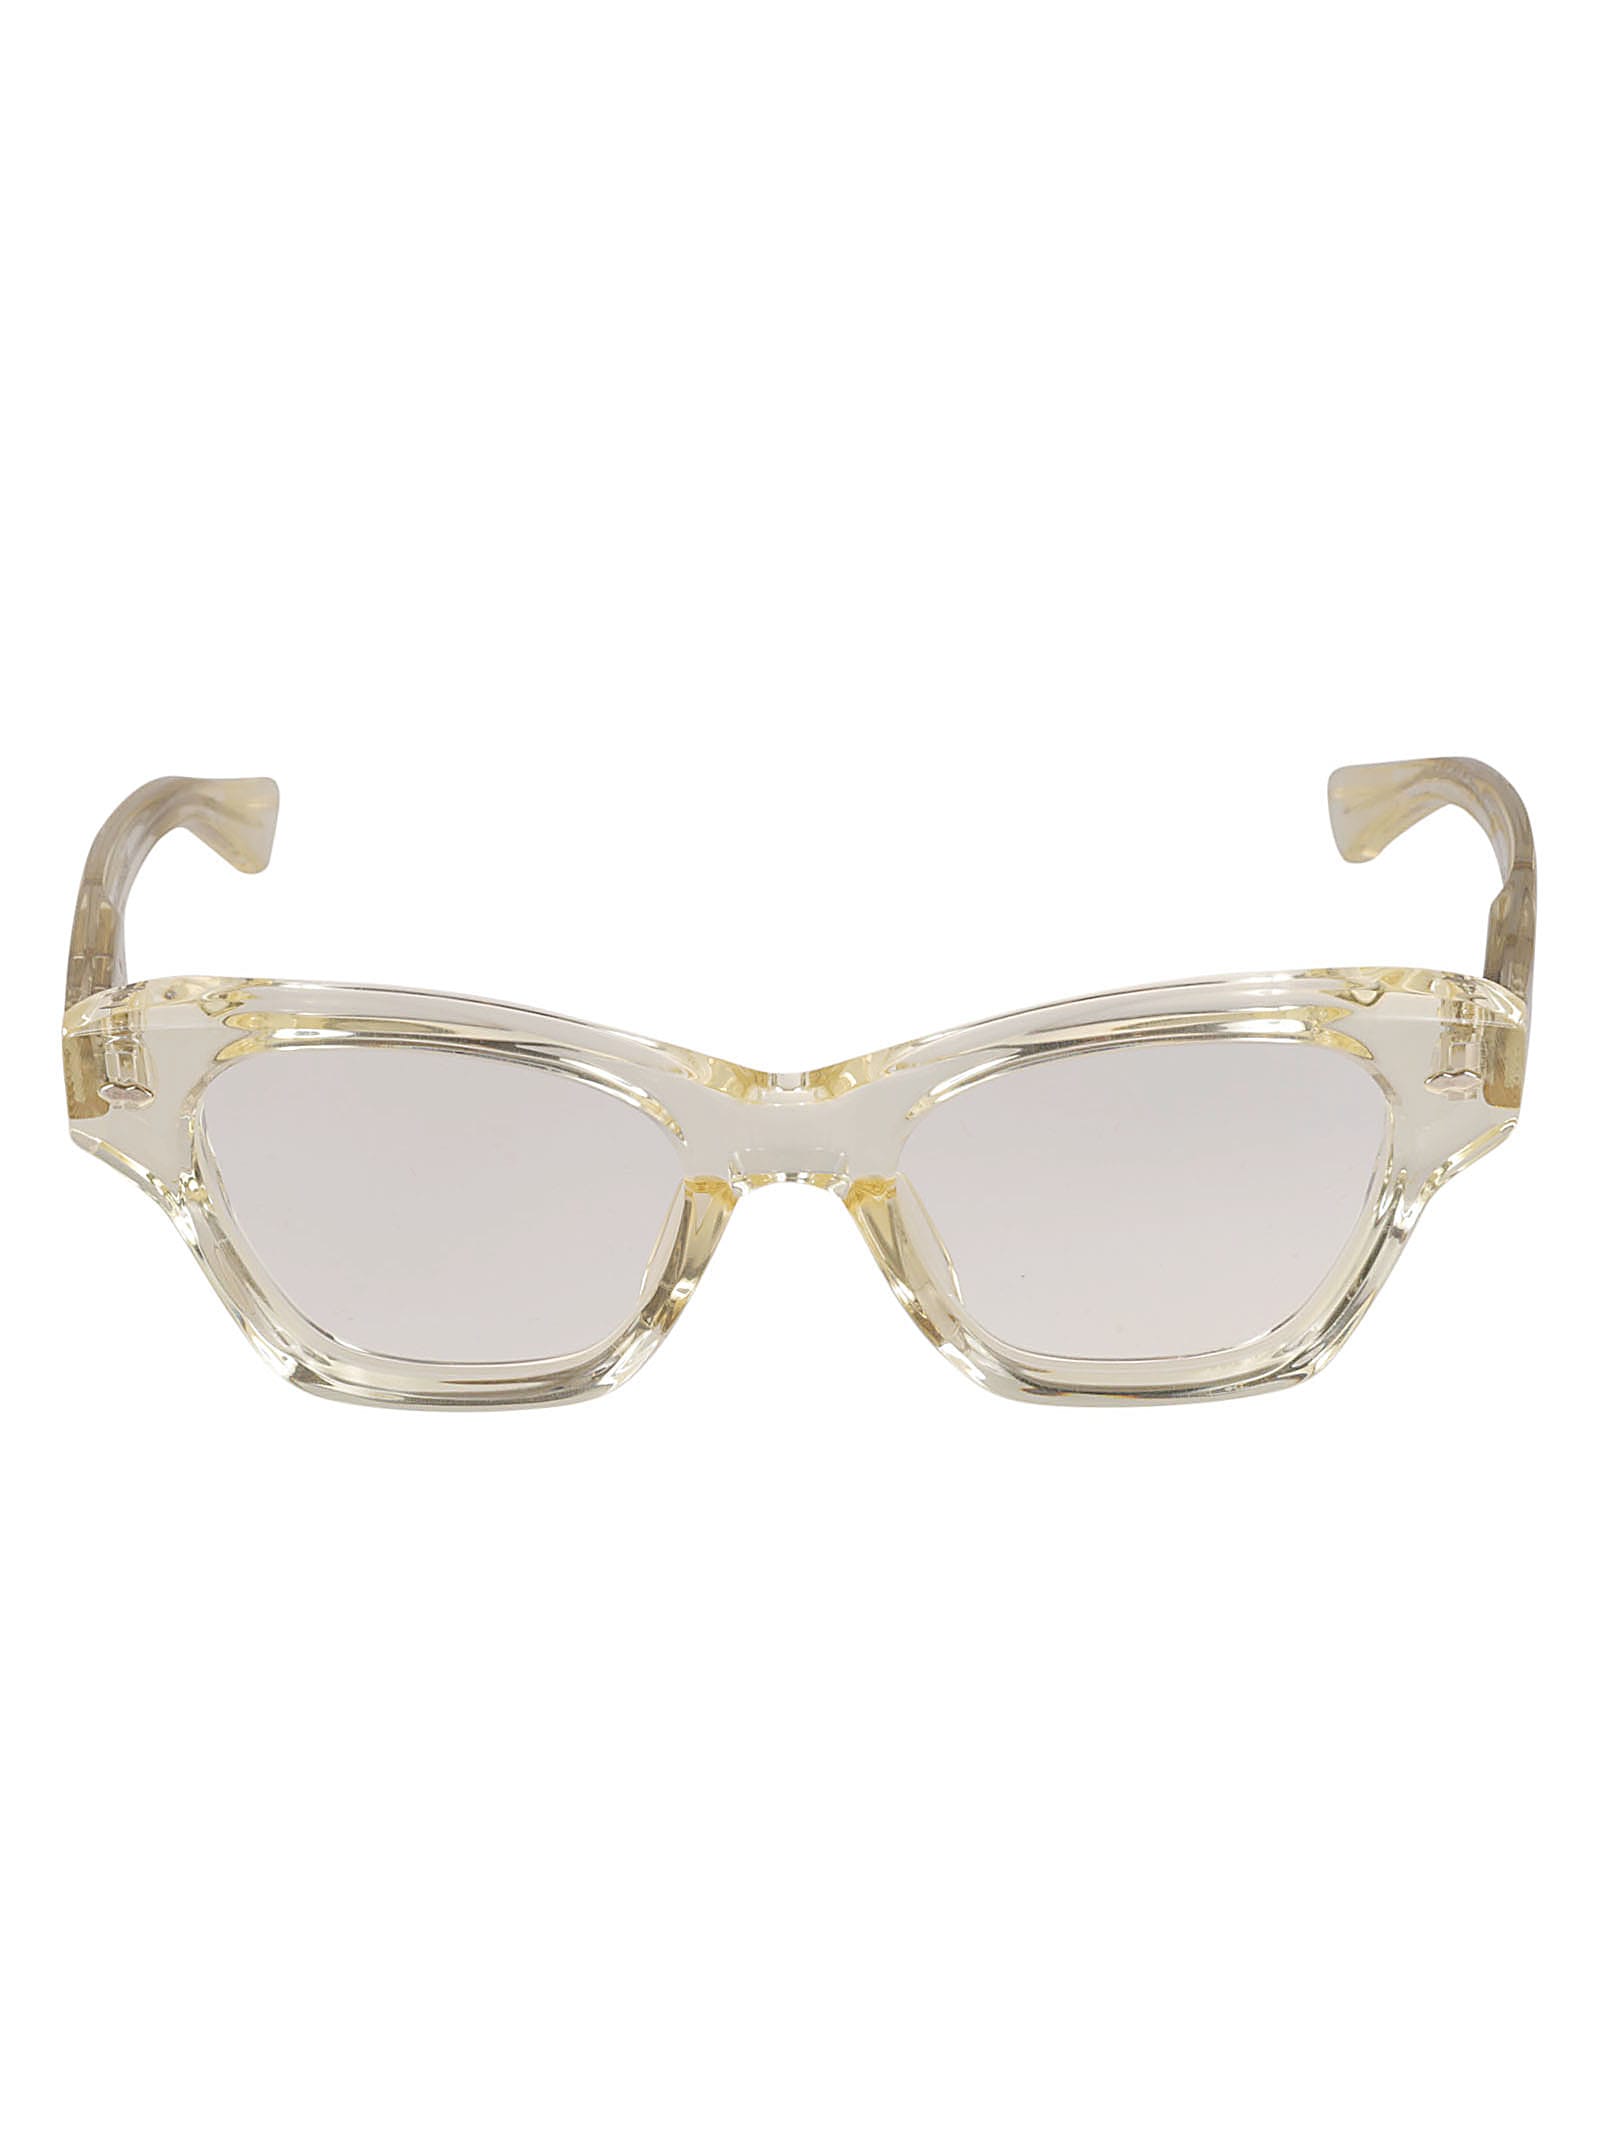 Jacques Marie Mage Grace Glasses In Sunkiss